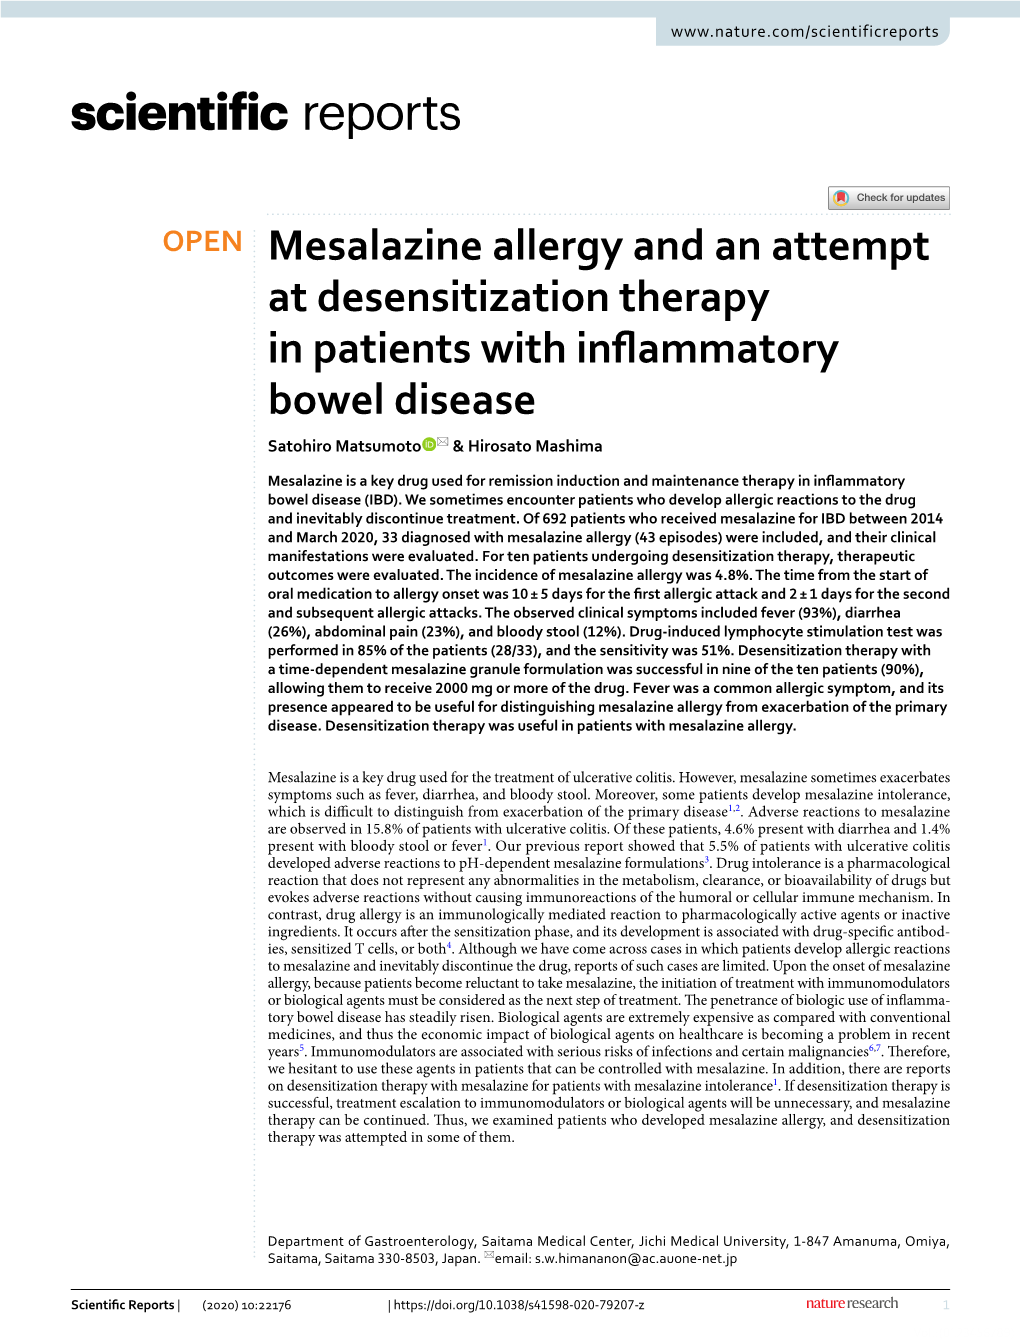 Mesalazine Allergy and an Attempt at Desensitization Therapy in Patients with Inflammatory Bowel Disease